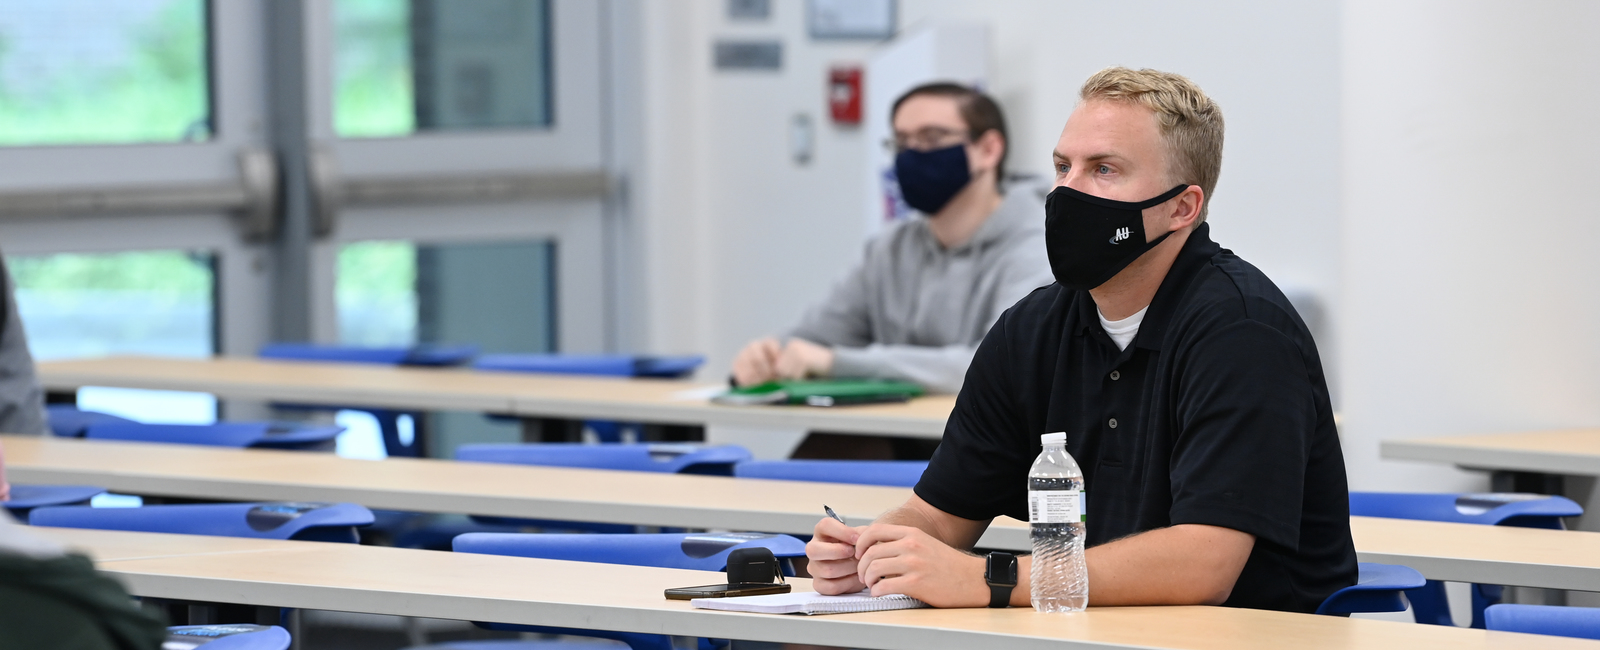 Older male student sitting in a classroom wearing a face mask and holding a pen taking notes